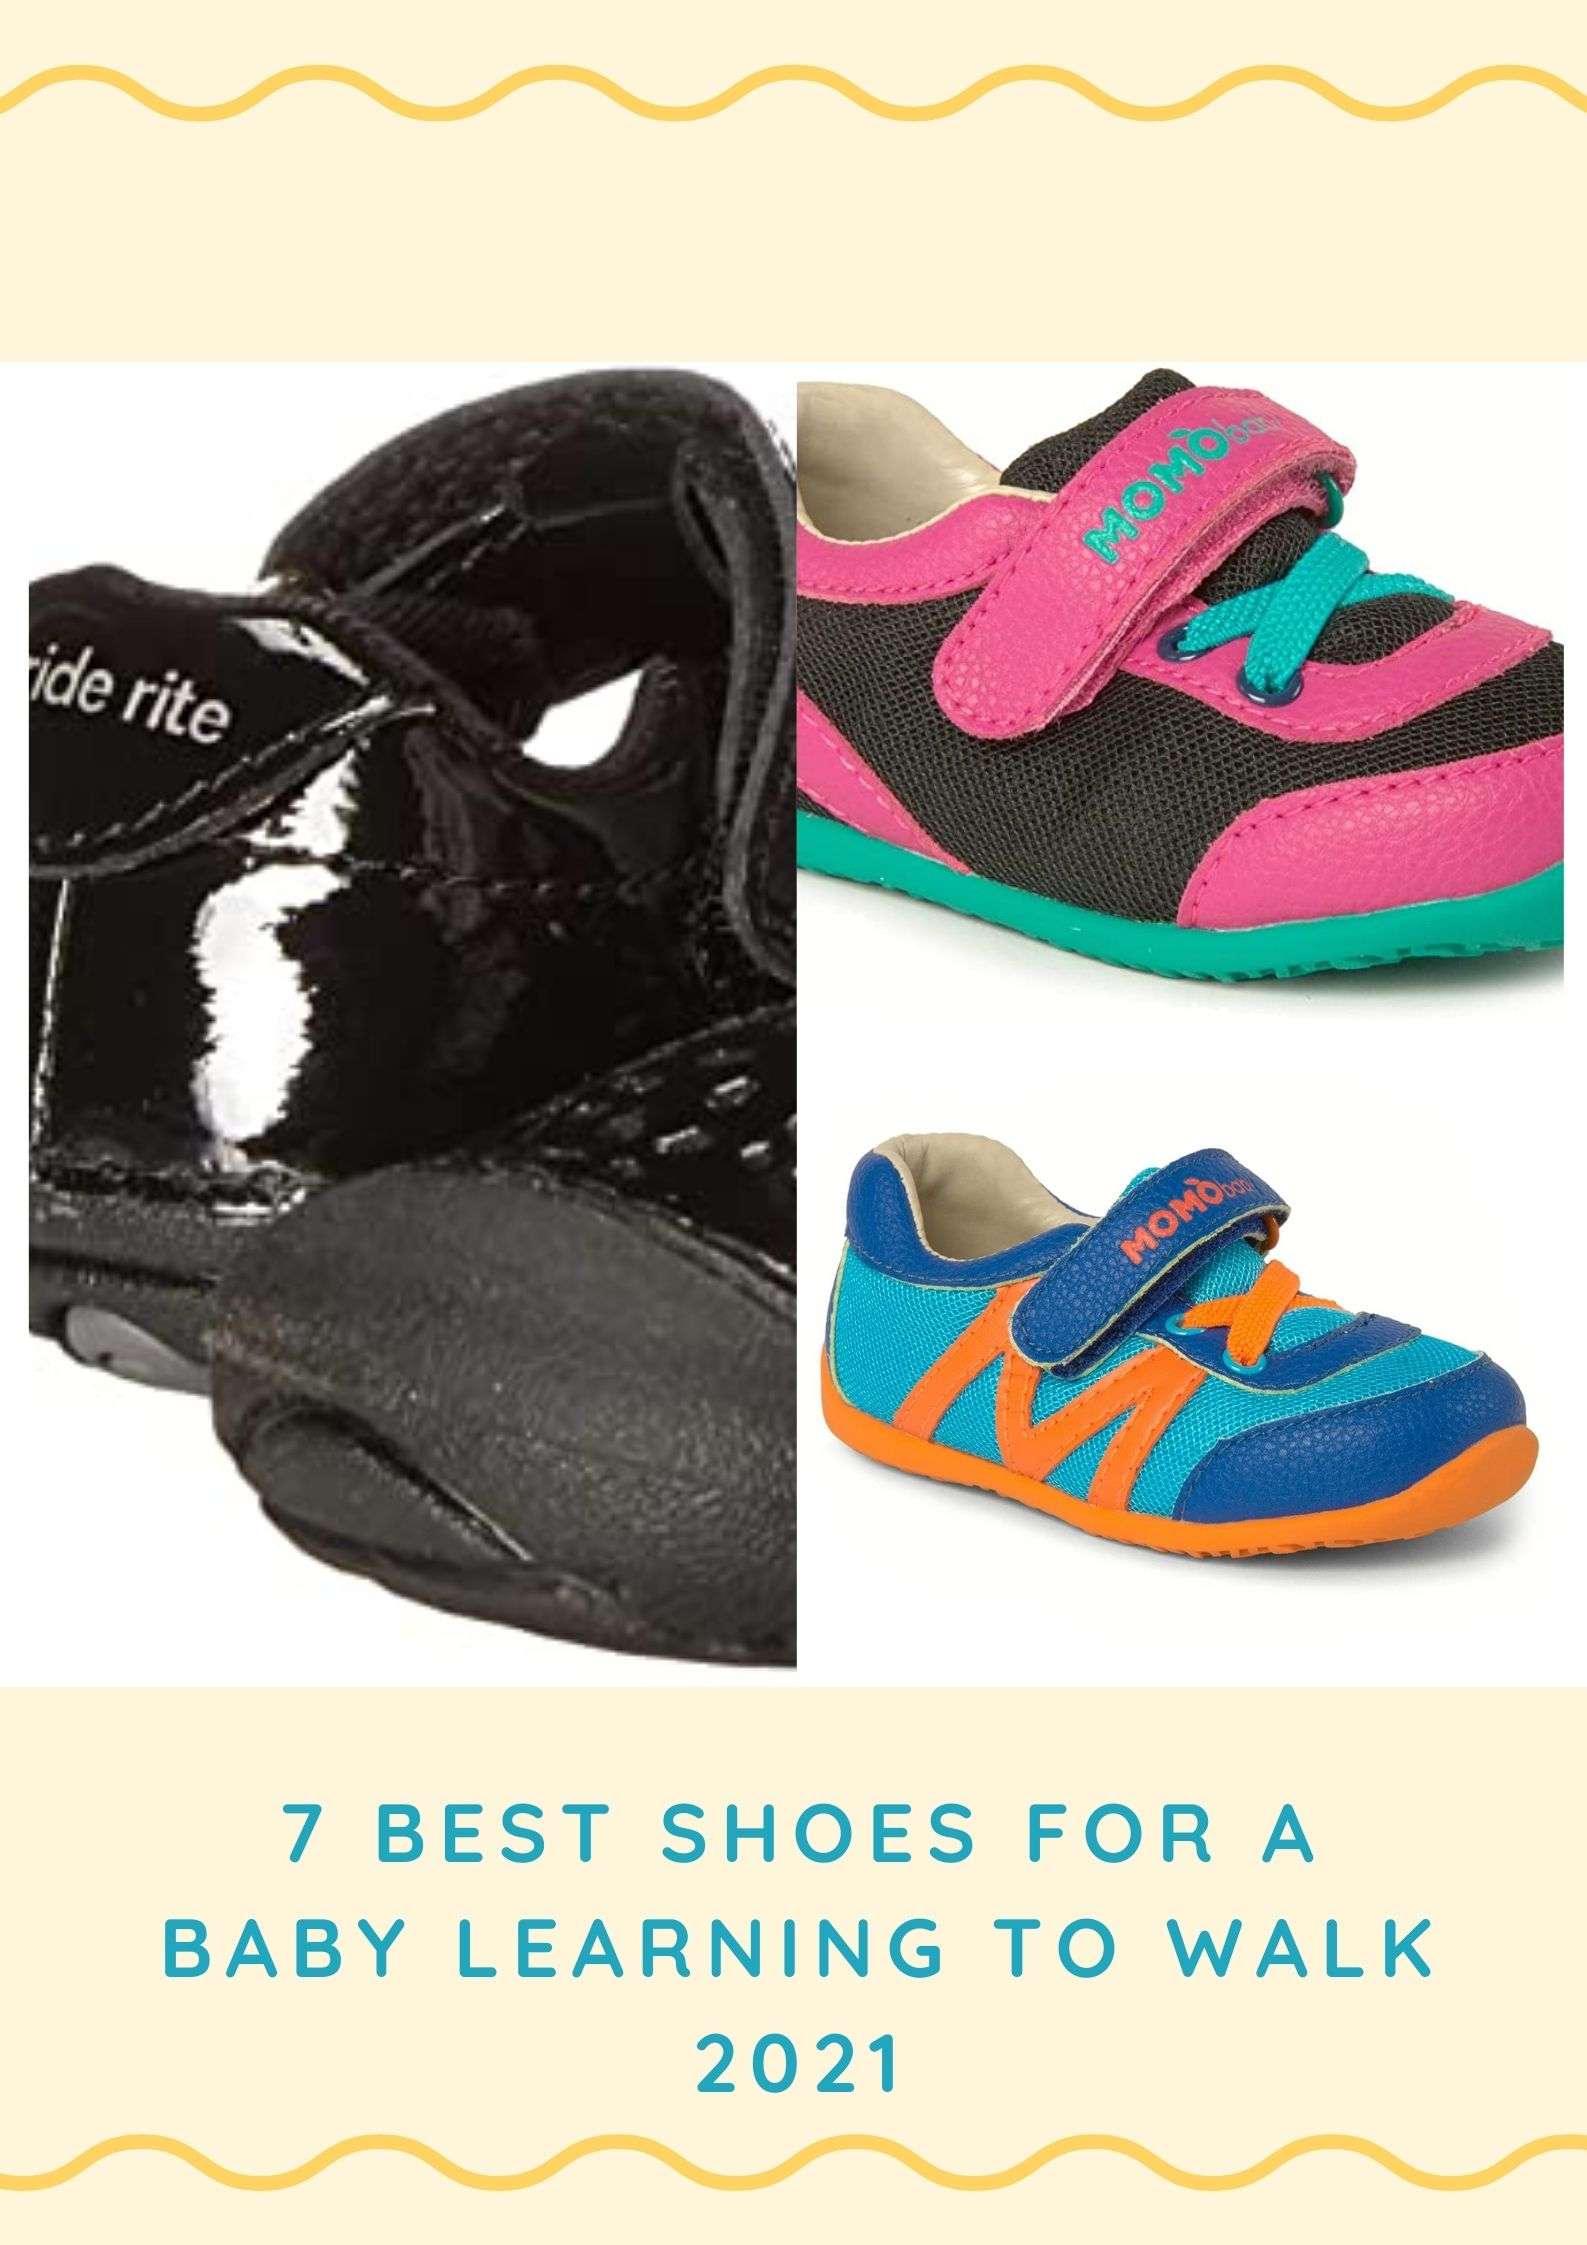 7 Best Shoes for A Baby Learning to Walk 2021 [Buying Guide]